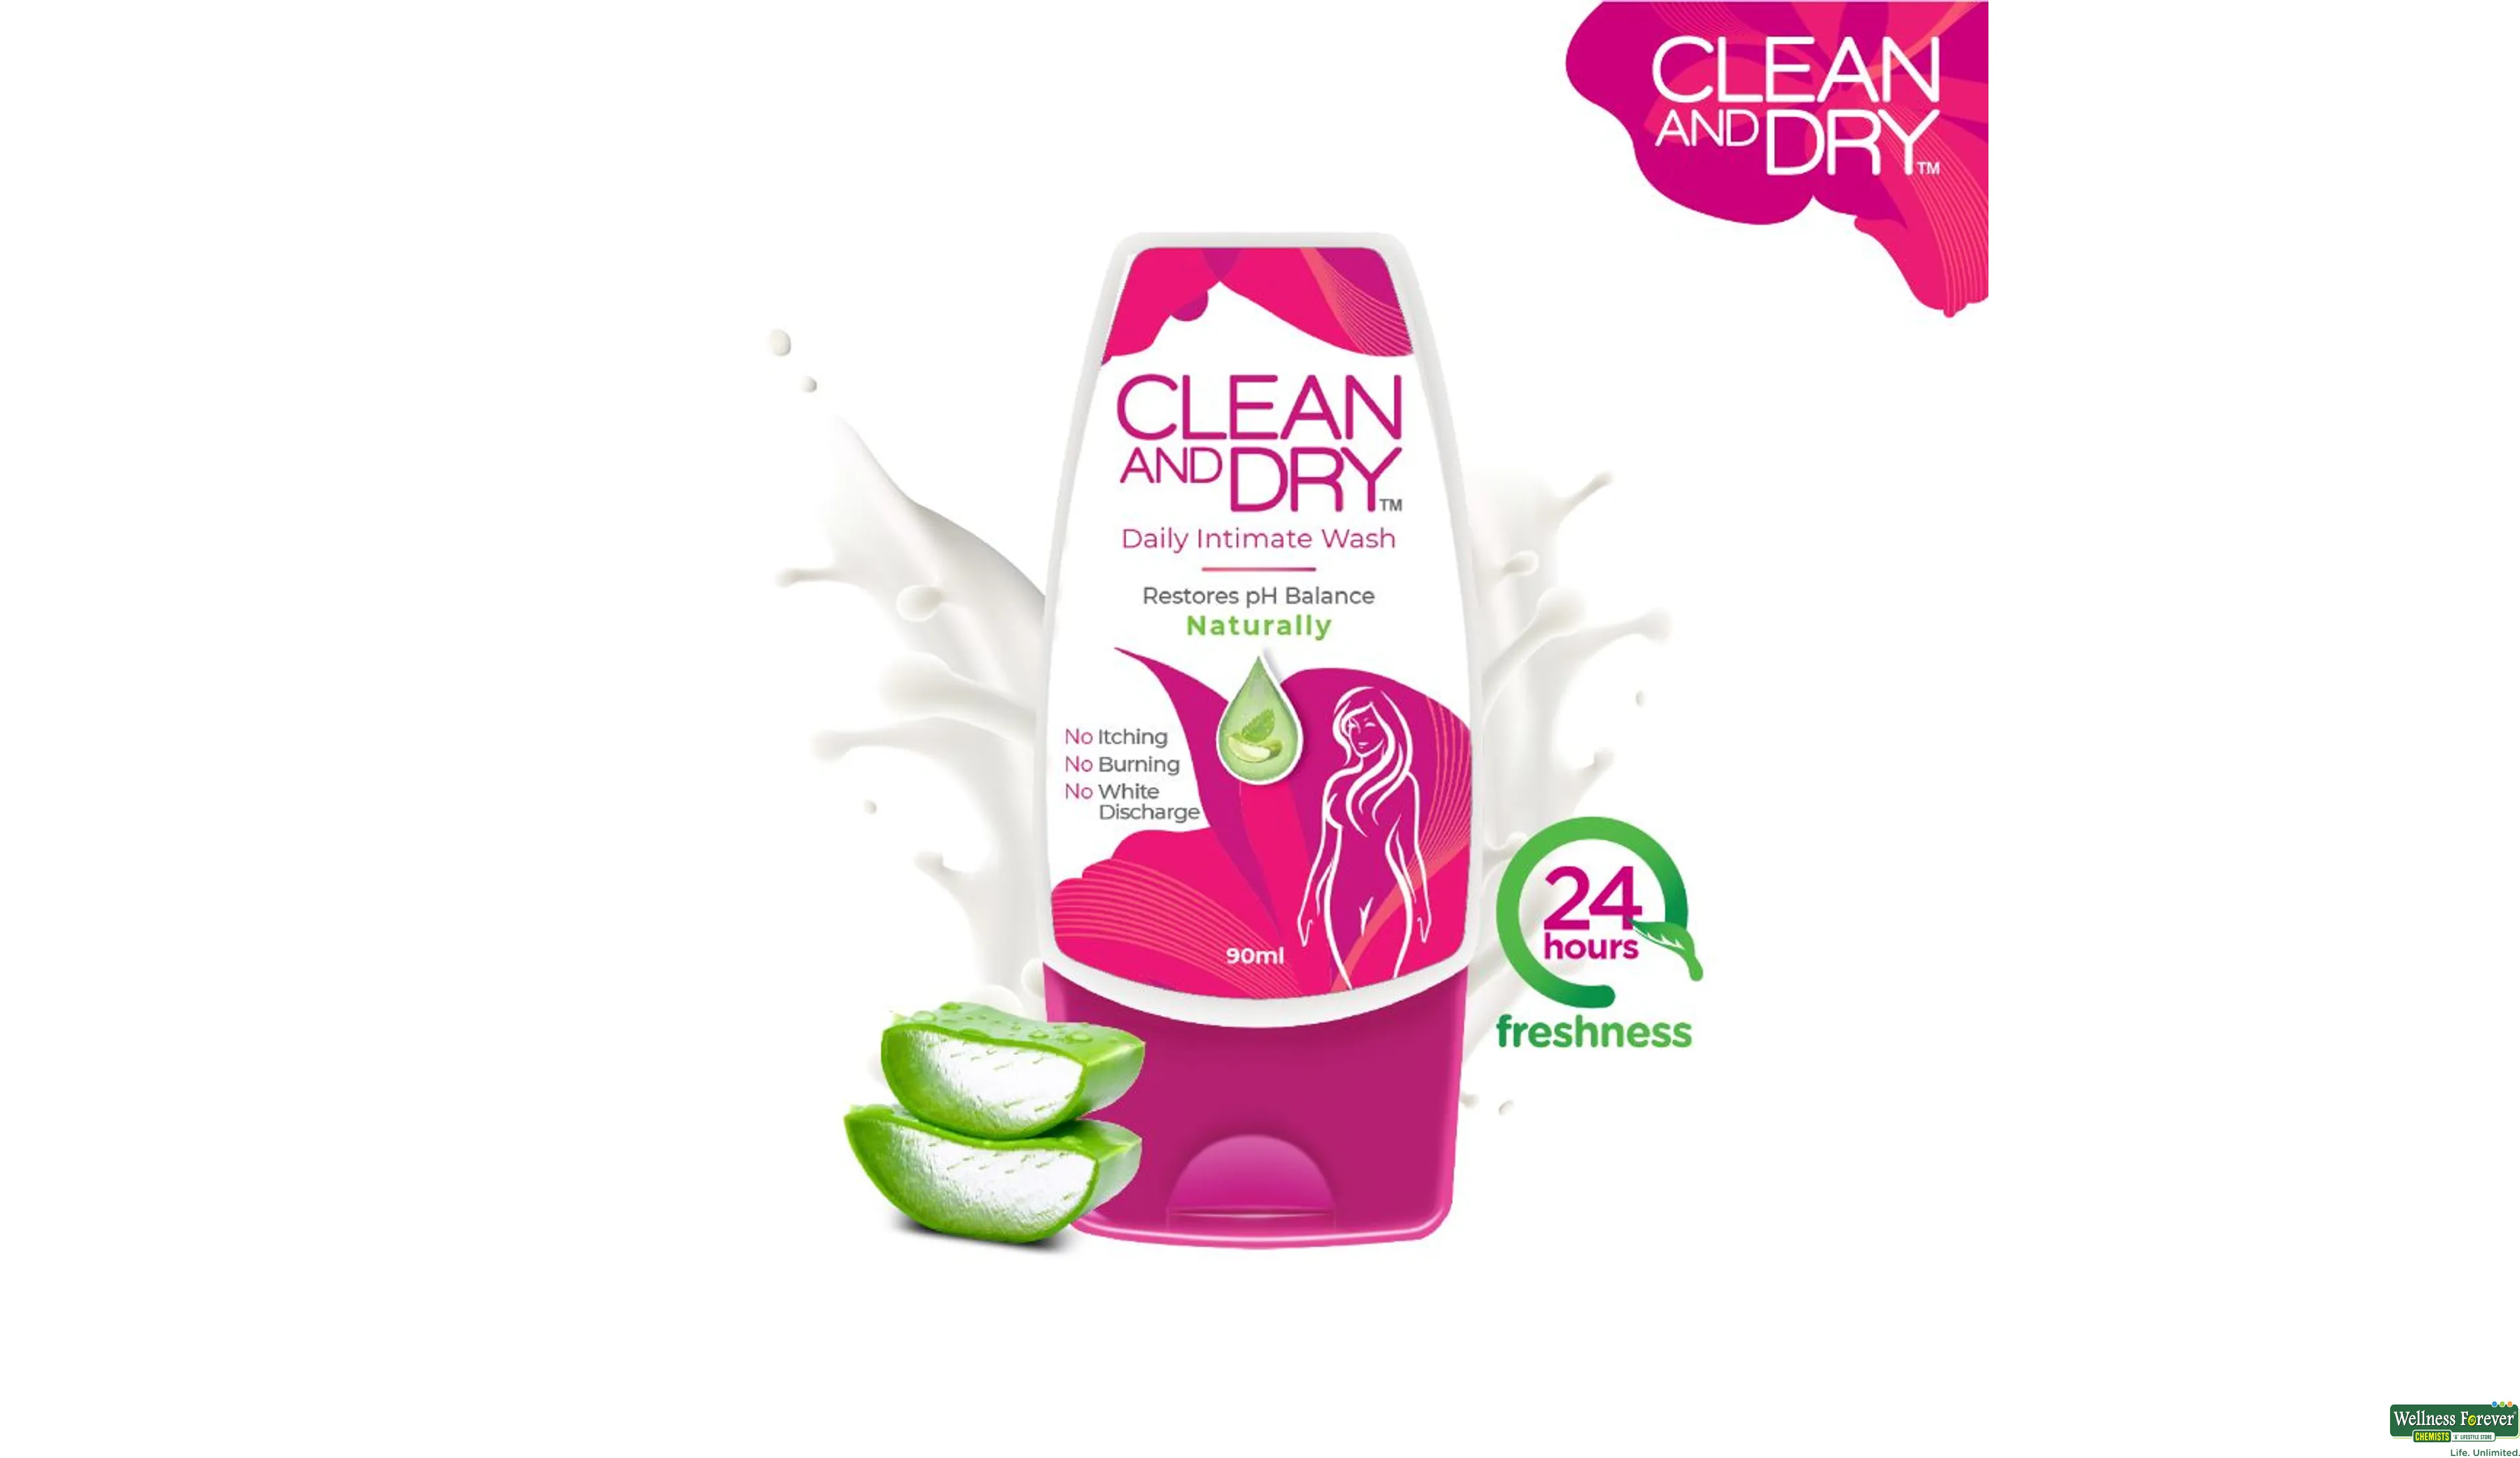 CLEAN AND DRY INTIMATE WASH 90ML- 2, 90ML, 